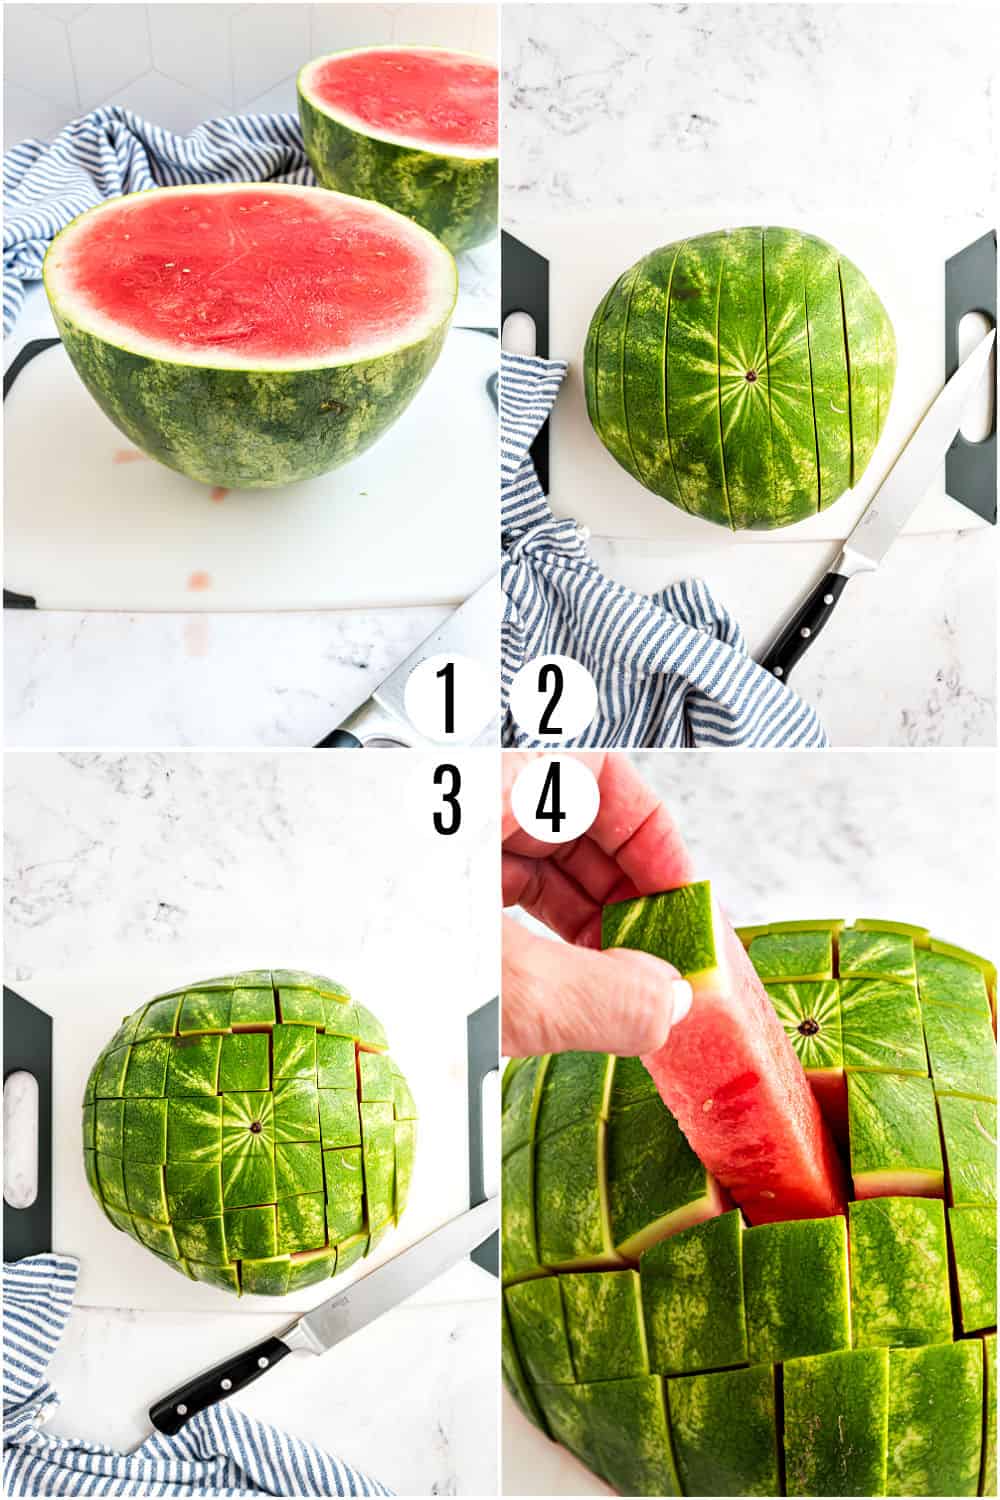 Step by step photos showing how to cut a watermelon into sticks.